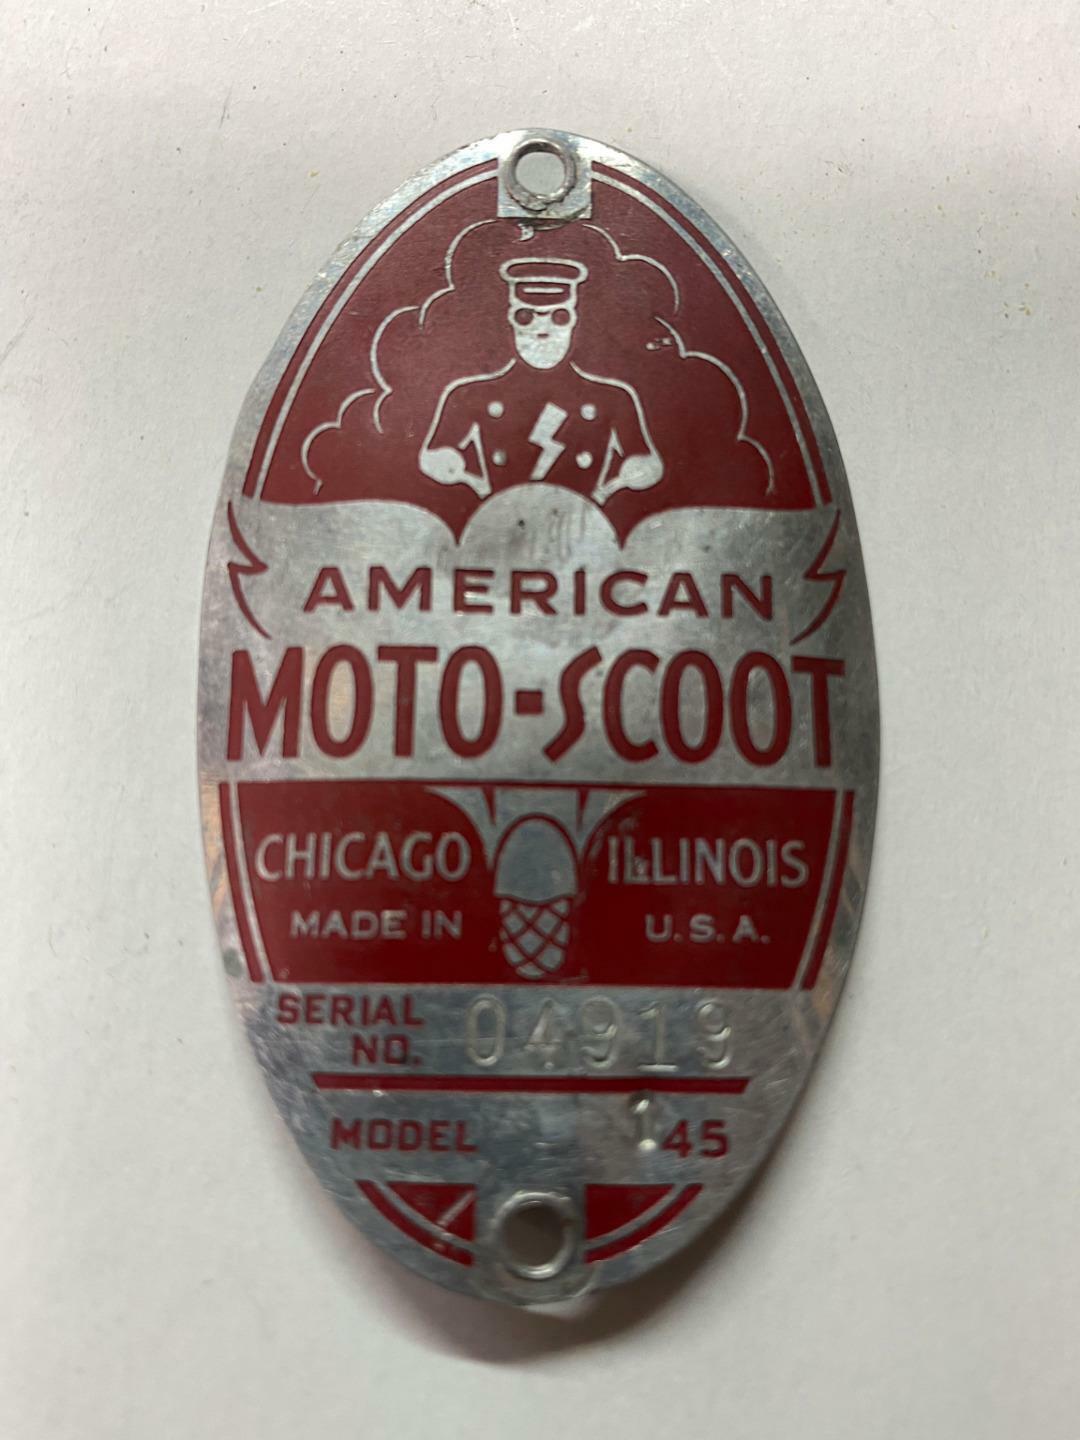 vintage bicycle AMERICAN MOTO-SCOOT Head BADGE tag Chicago, Illinois scooter